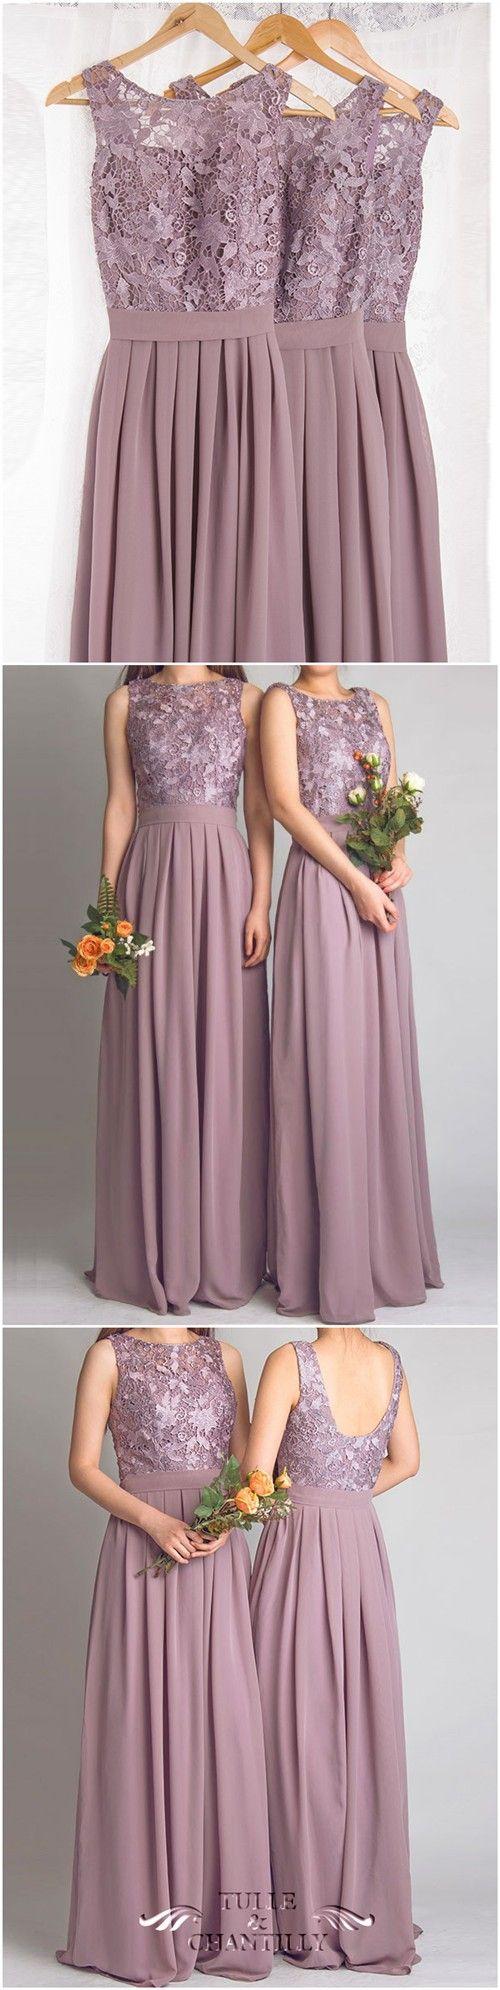 Hochzeit - Dramatic Vintage Lace Bridesmaid Dress With Flowing Chiffon Skirt [TBQP227] - $169.00 : Custom Made Wedding, Prom, Evening Dresses Online